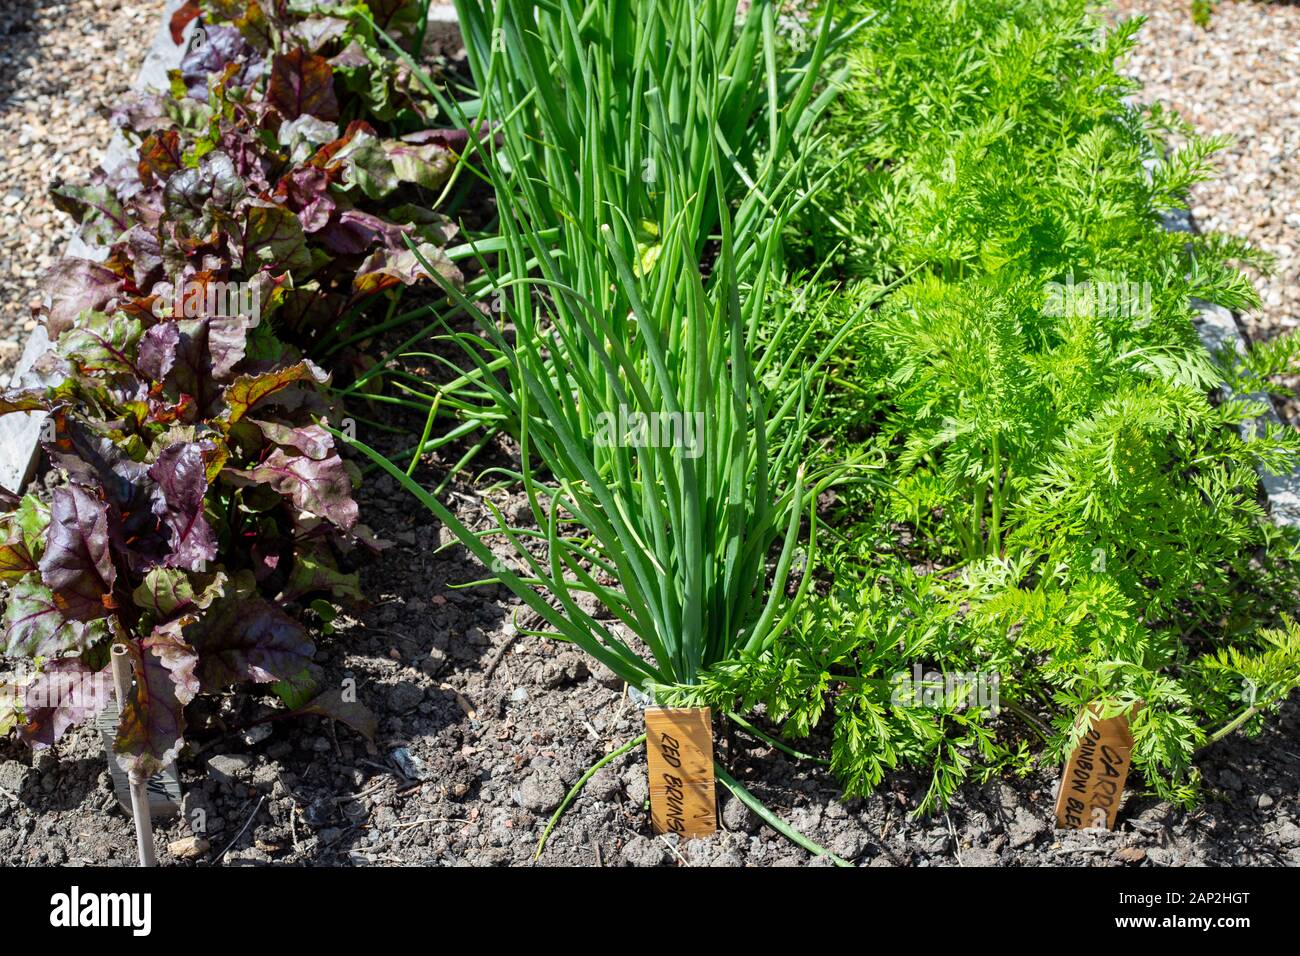 Healthy young beetroot, onions and carrot plants growing in a home vegetable garden, Christchurch, New Zealand Stock Photo